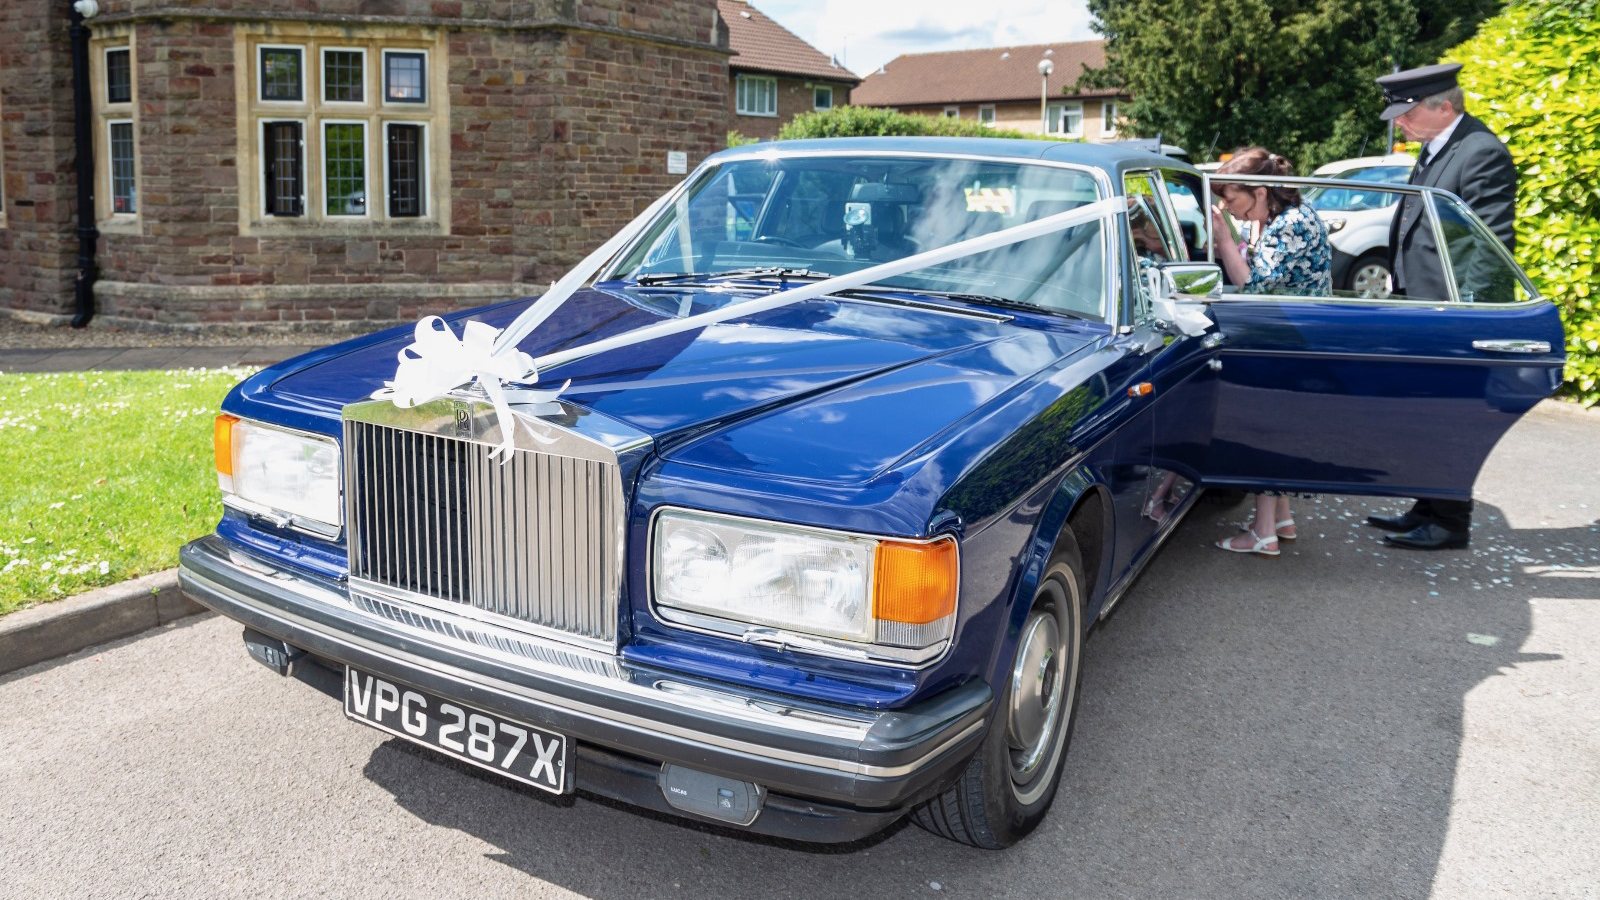 Blue Rolls-Royce Silver Spur decorated with White Ribbons and bows. Uniformed chauffeur is opening the rear door to let the bride out.